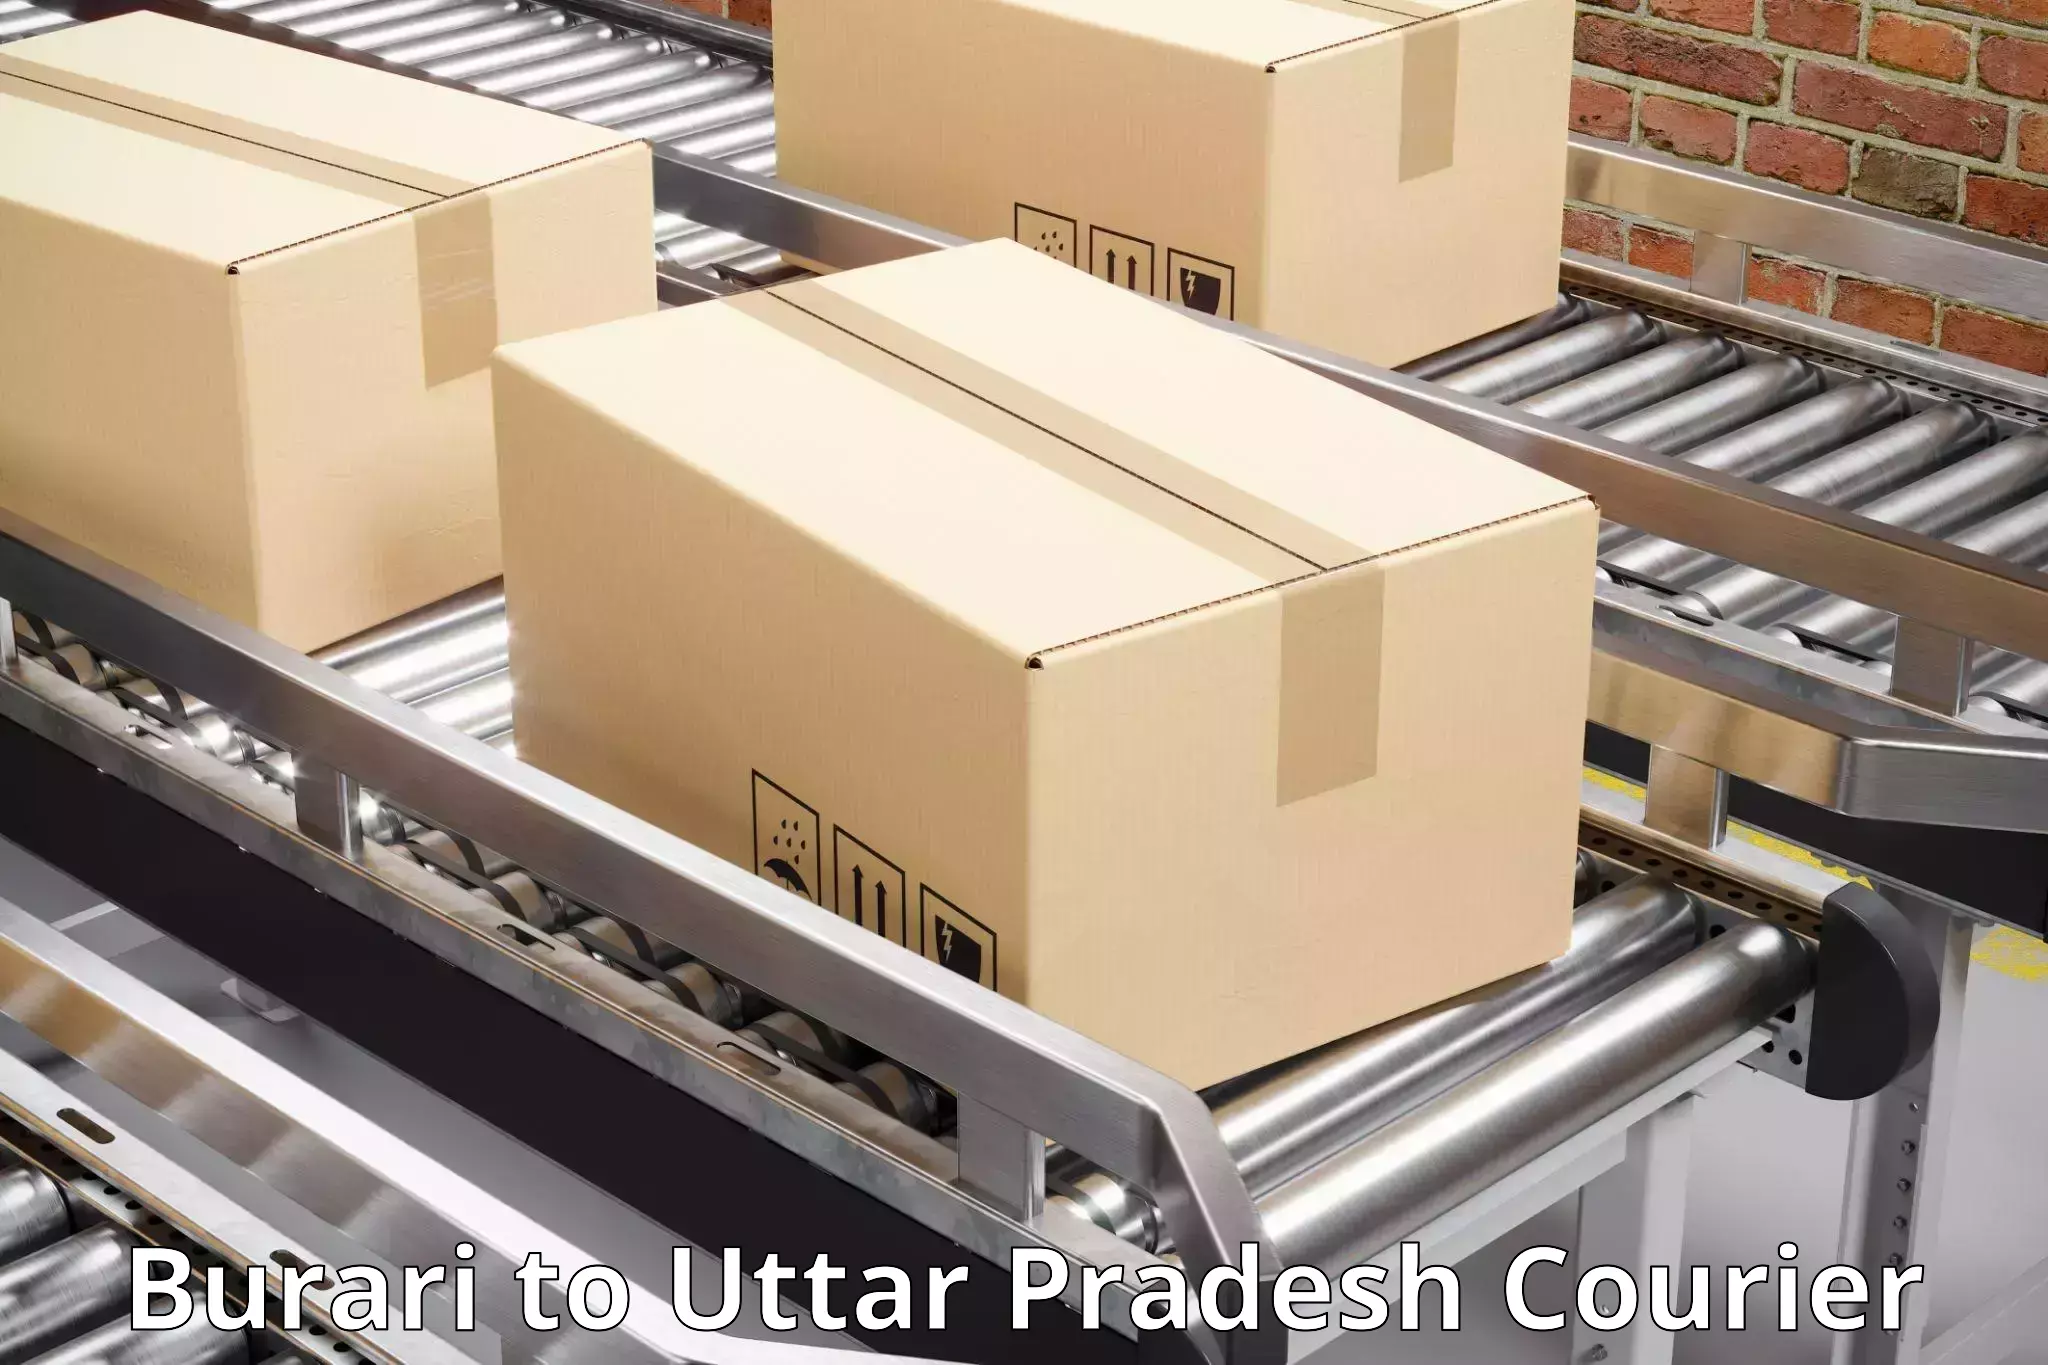 Next-generation courier services Burari to Fatehabad Agra